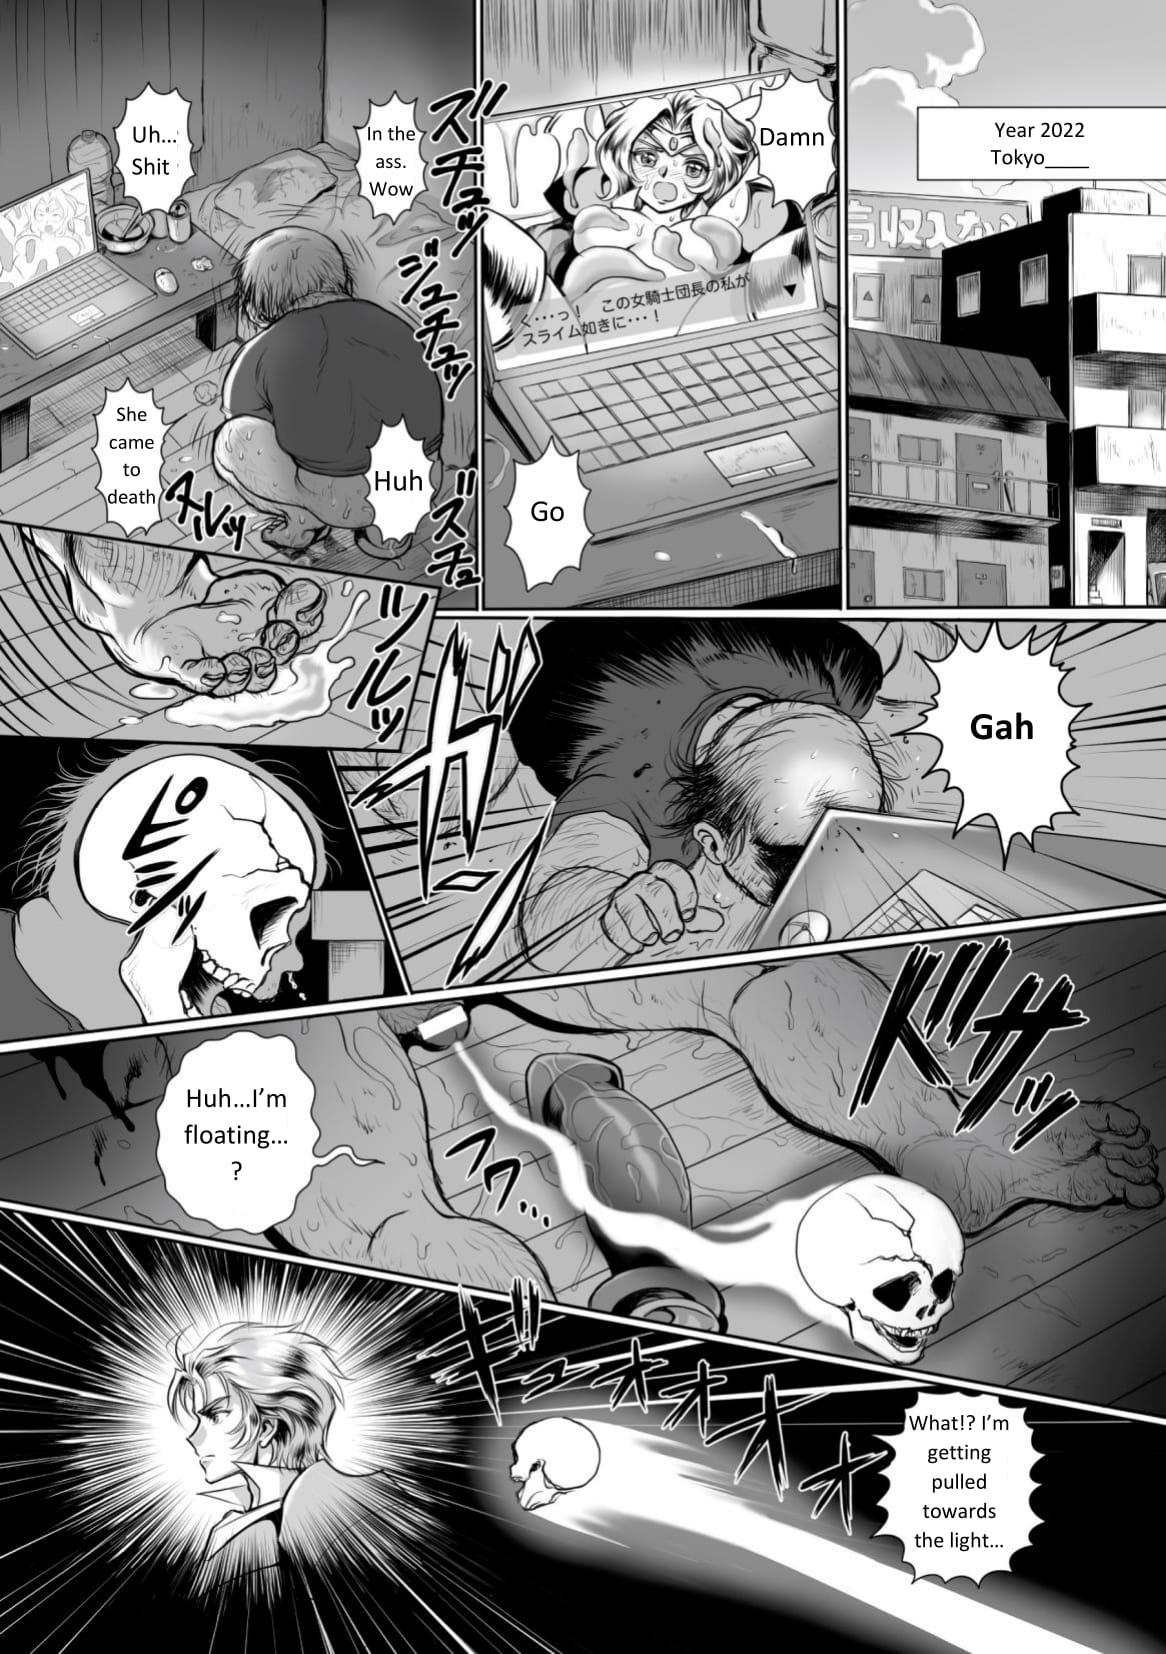 Slim [Usuno Taro] Possessed Knight Stallion-Taken Over By Disgusting Man Raped and Climaxes Unsightly - English Porno 18 - Page 5